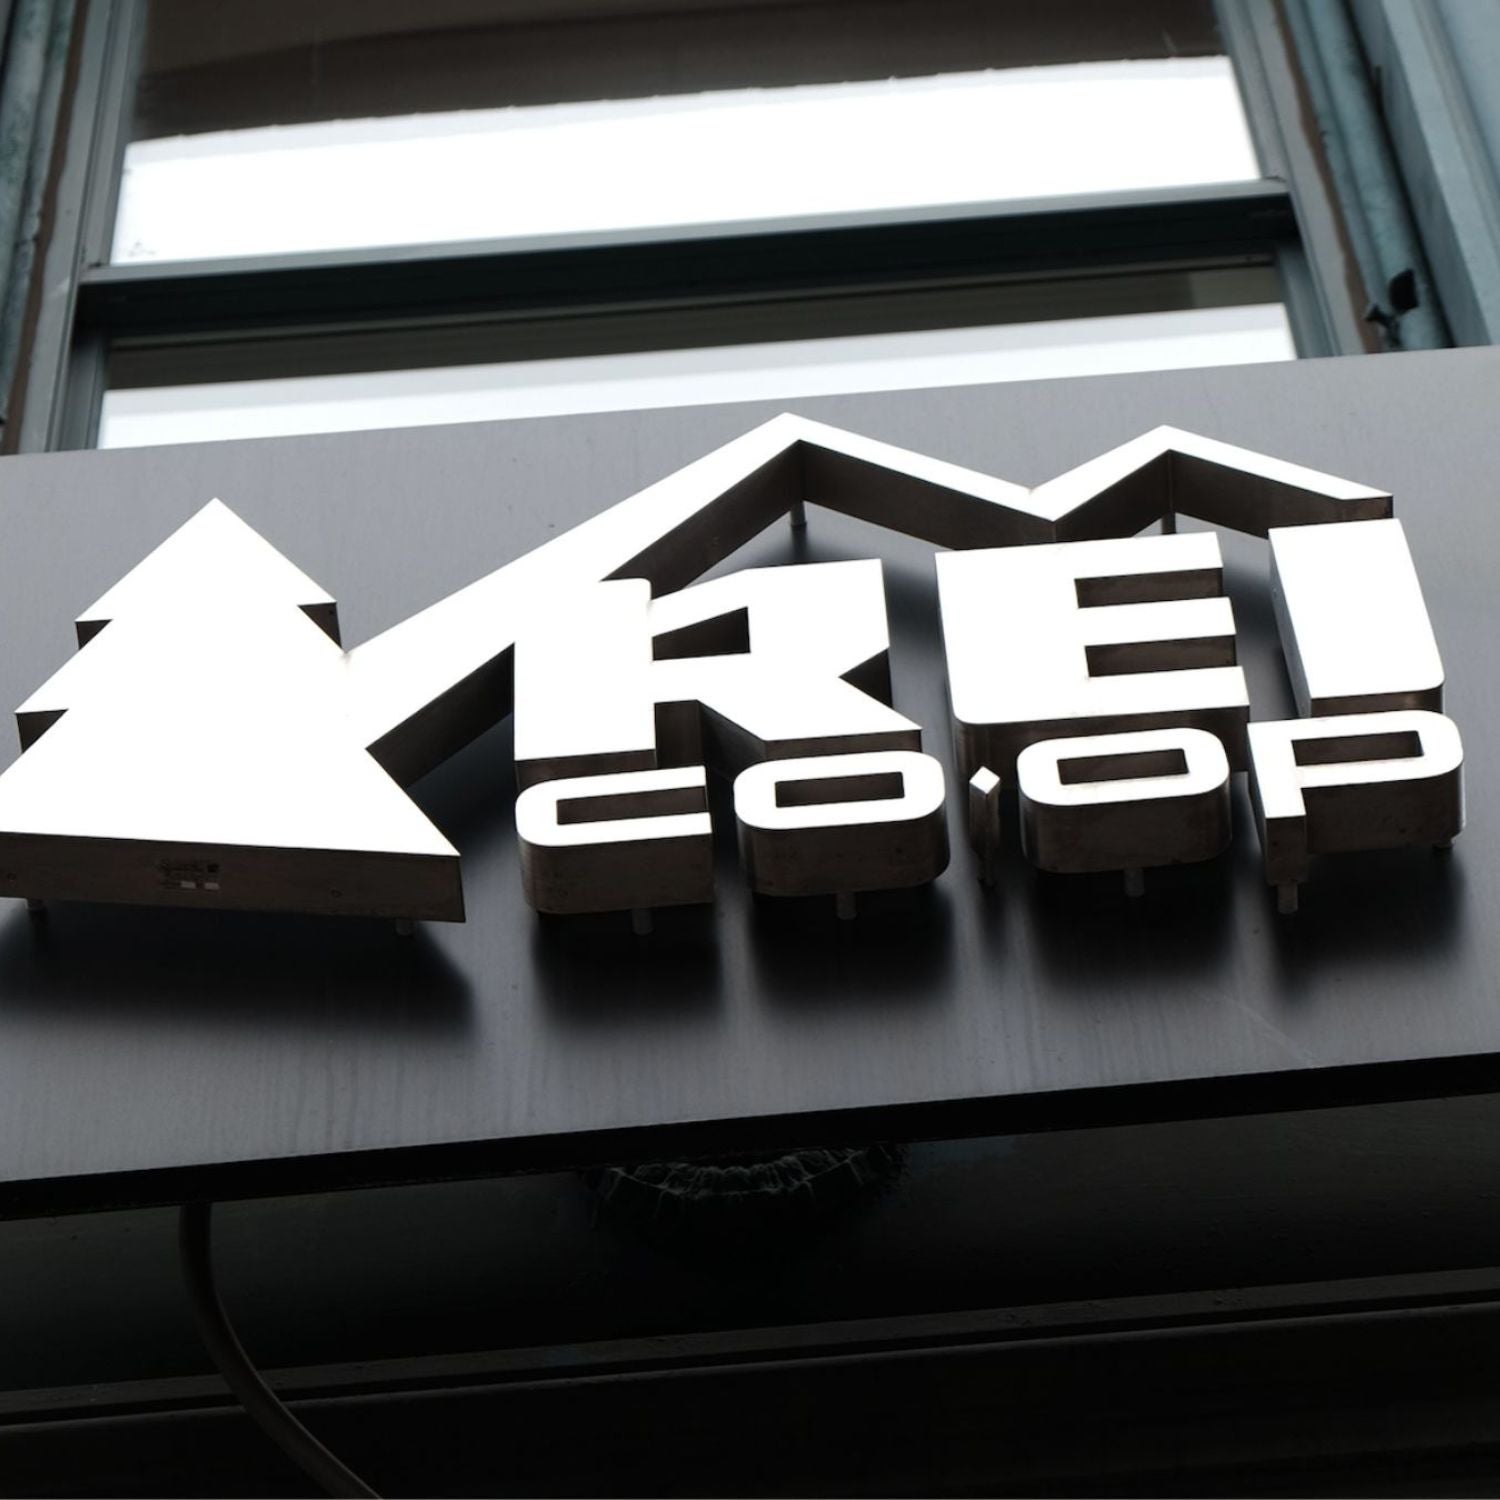 rei outlet startups, new startups